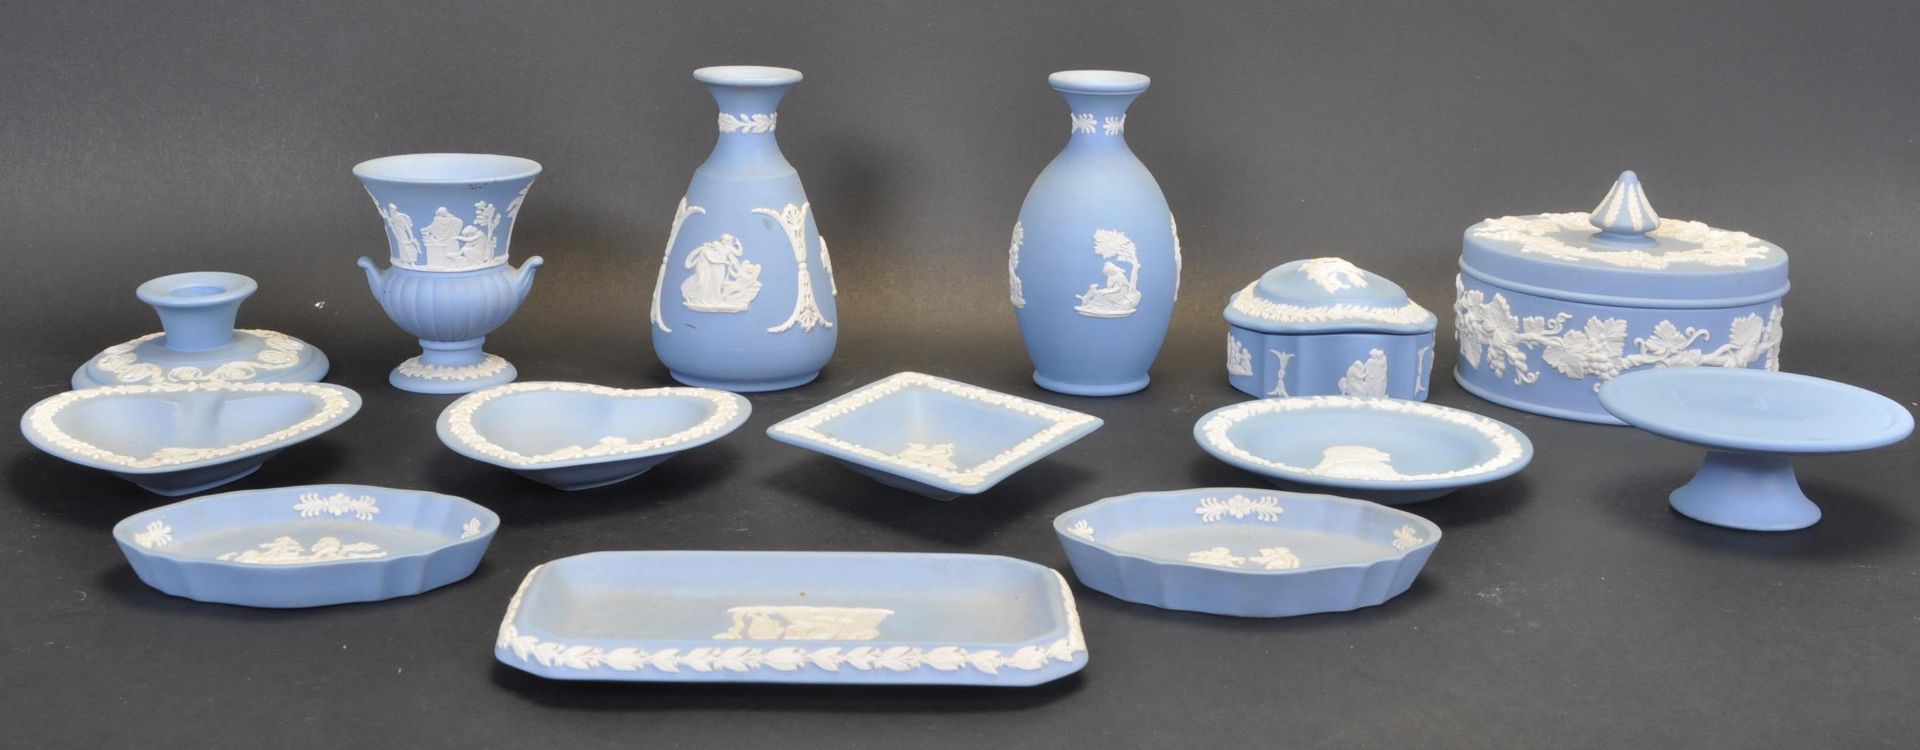 COLLECTION OF EARLY 20TH CENTURY WEDGWOOD JASPERWARE